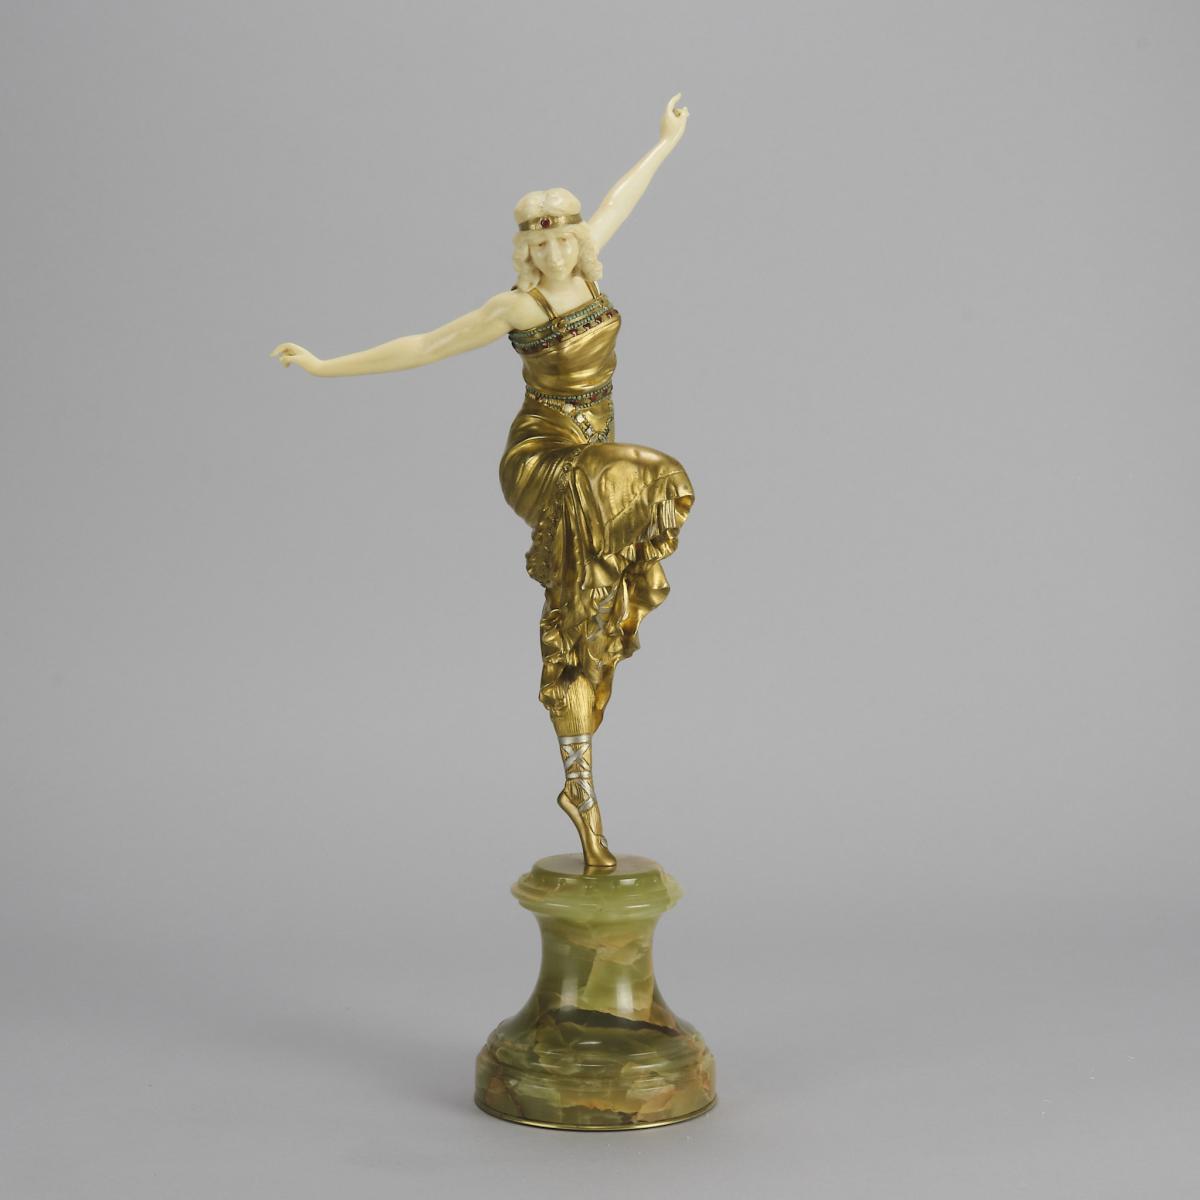 Early 20th Century Chryselephantine Sculpture entitled "Russian Dancer" by Paul Philippe